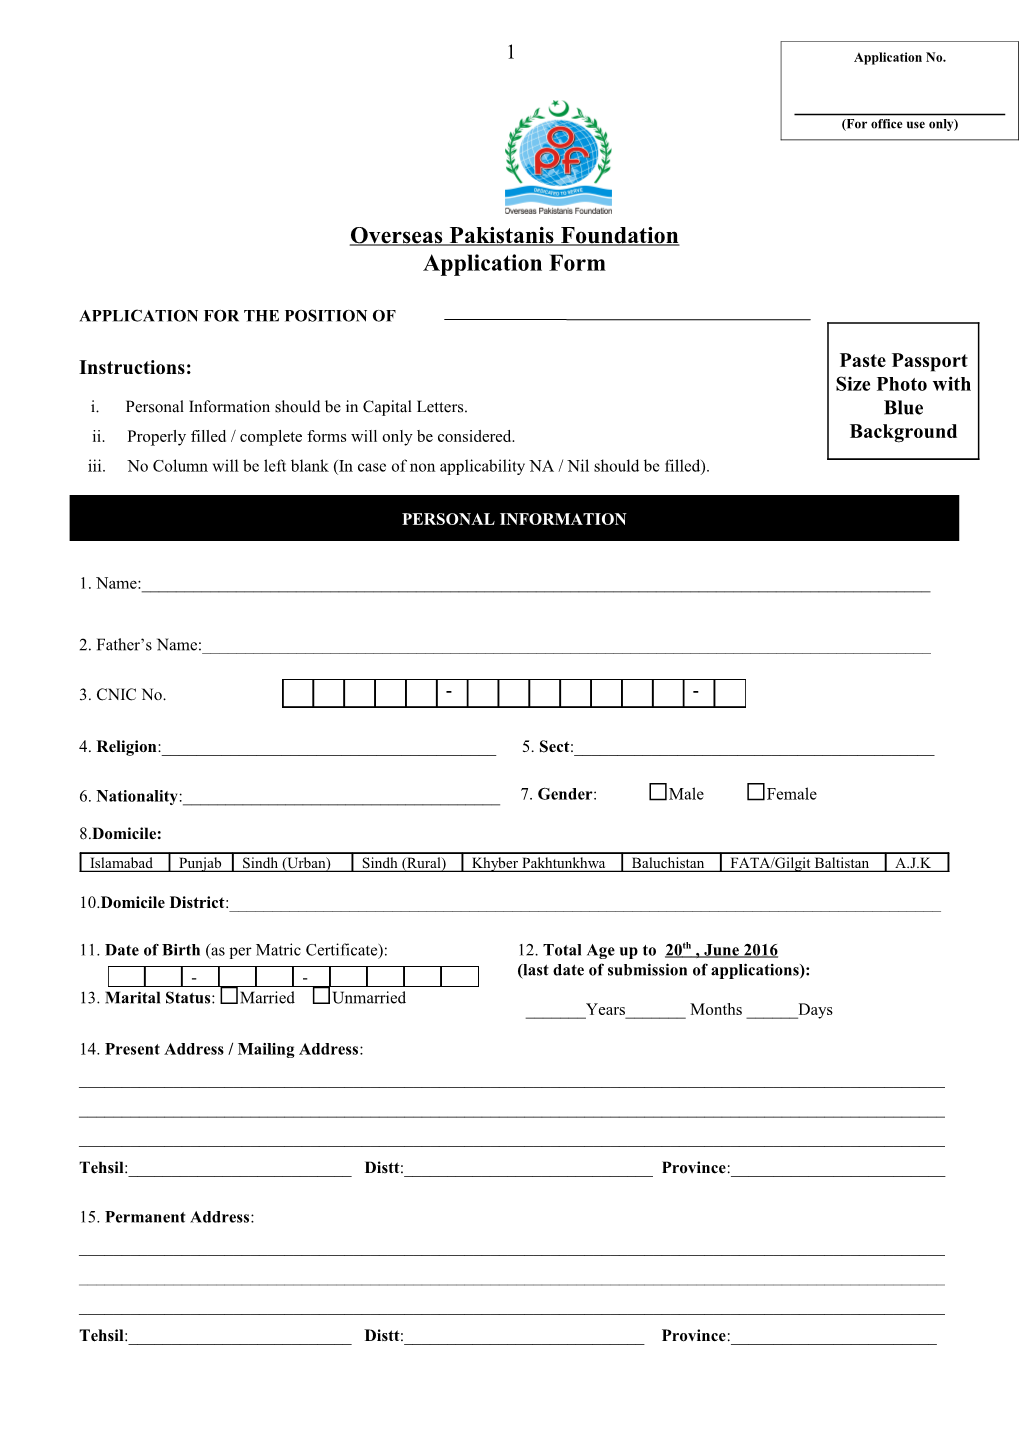 Draft of Application Form